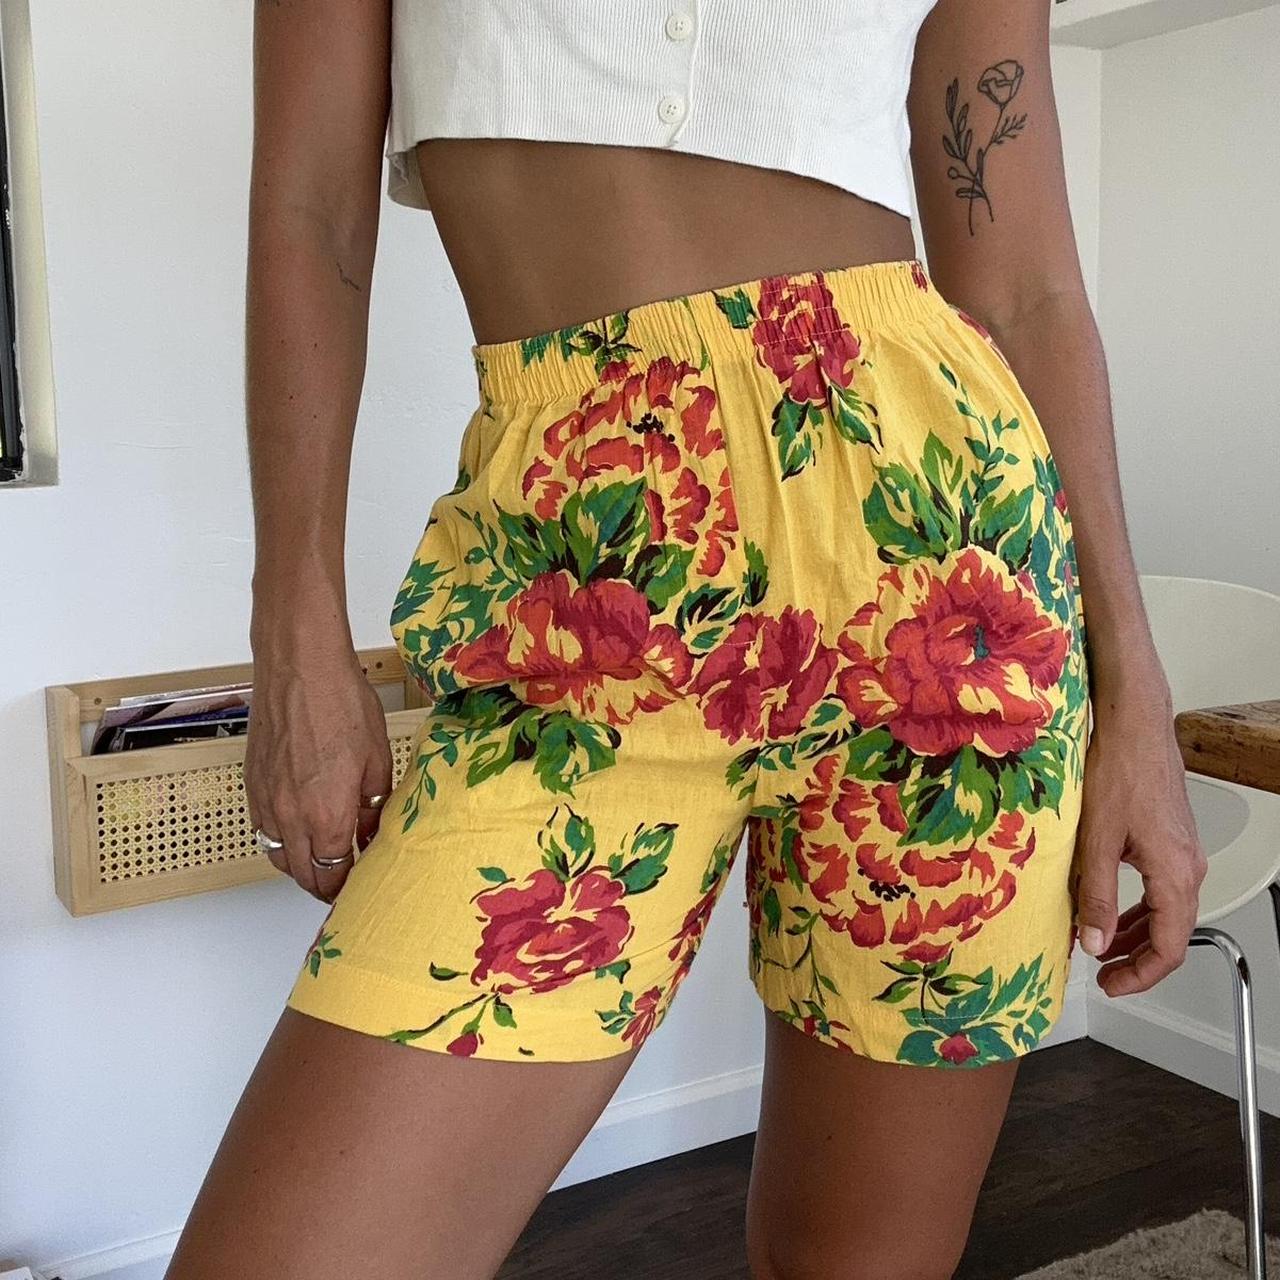 VINTAGE SHORTS!!! 🌼 From my personal closet, I... - Depop